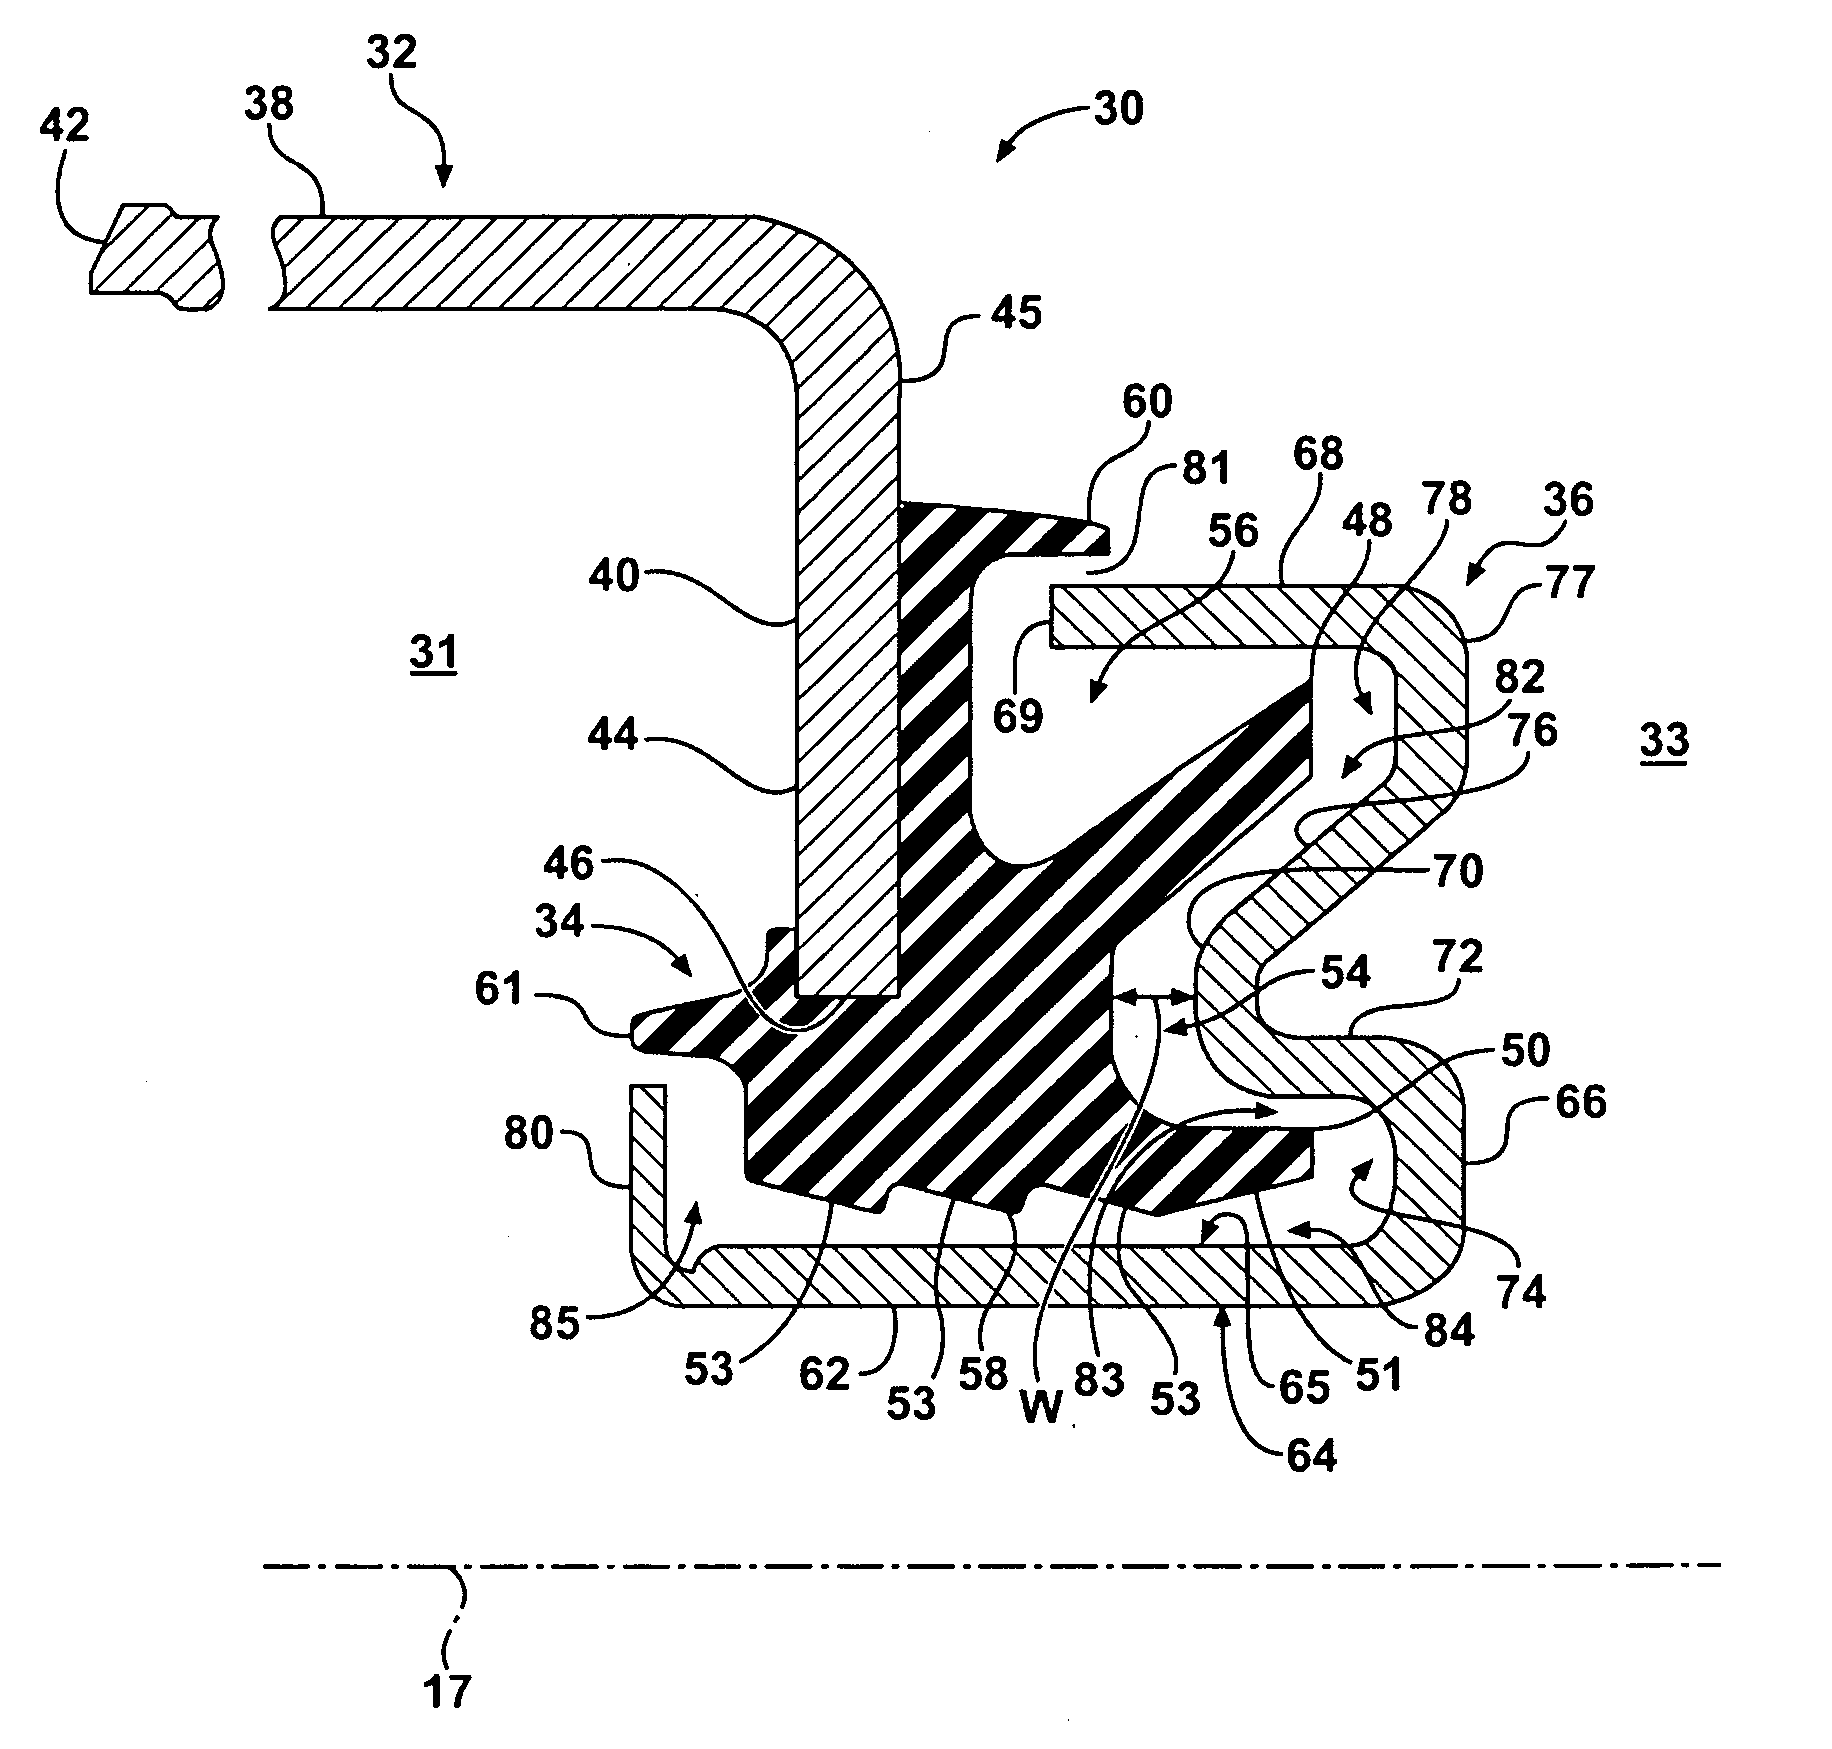 Non-contact labyrinth seal assembly and method of construction thereof